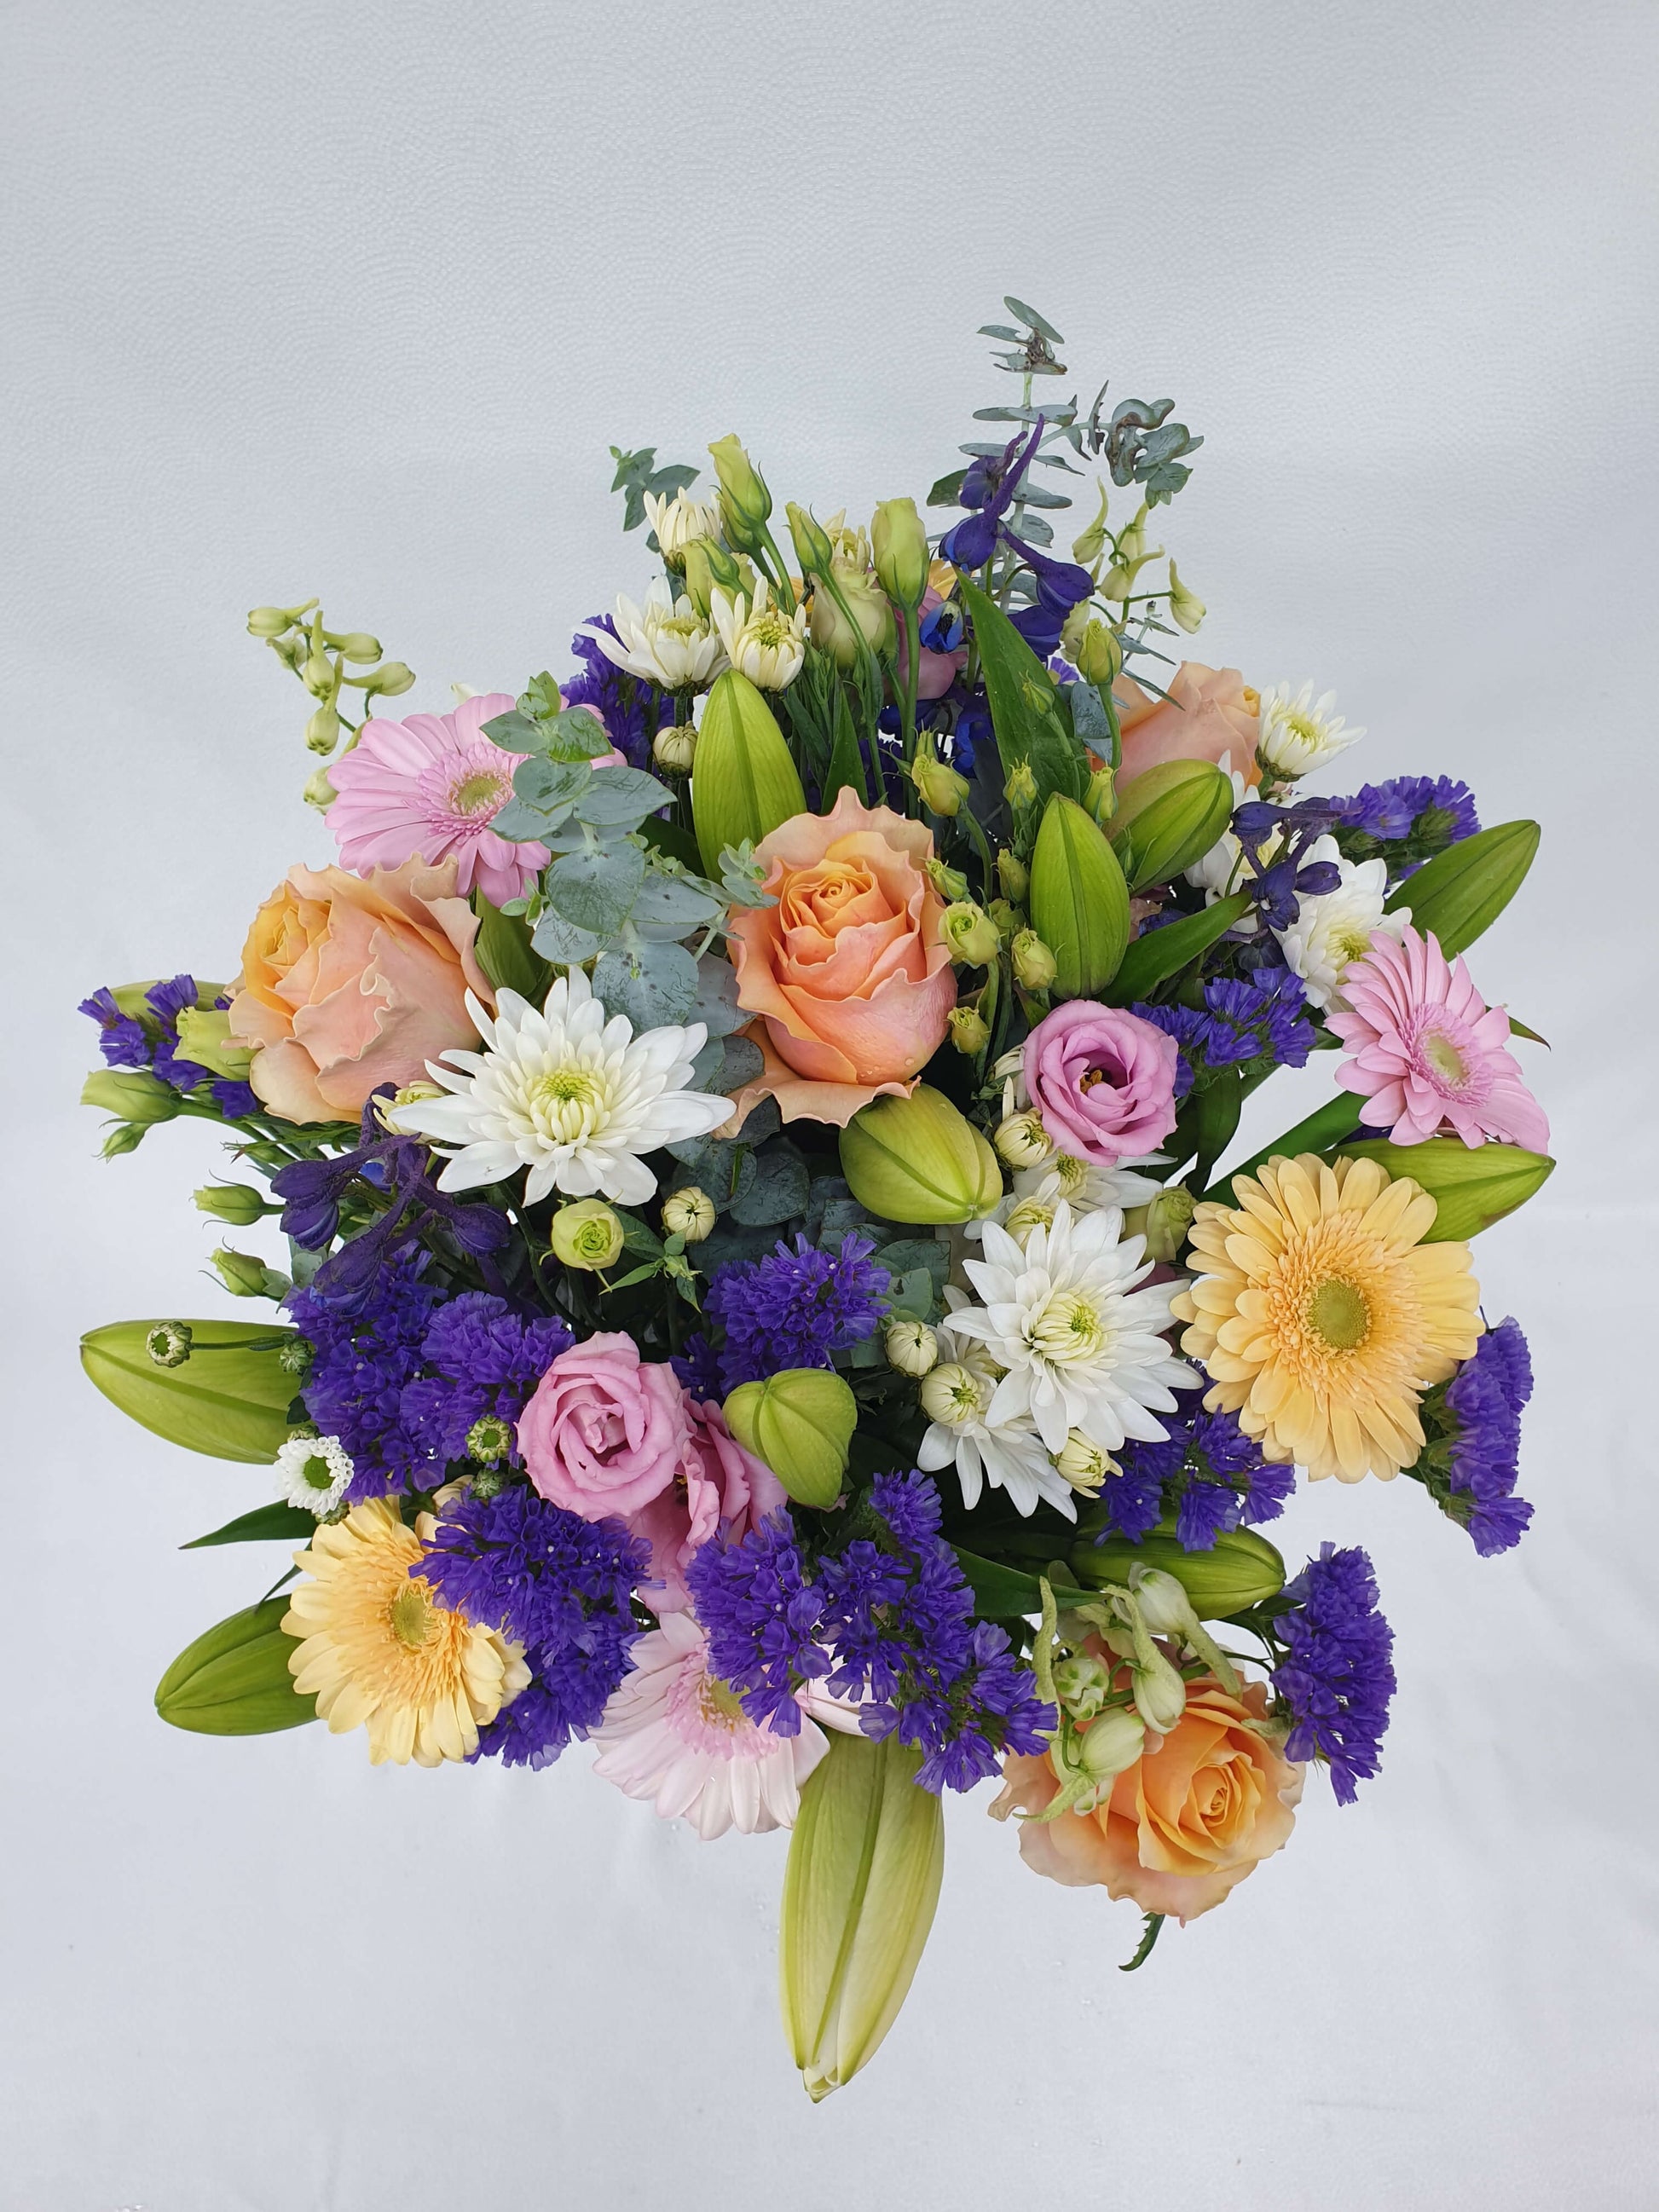 A colourful bouquet from above. Thee are pink, orange, purple, yellow, green, and white flowers.